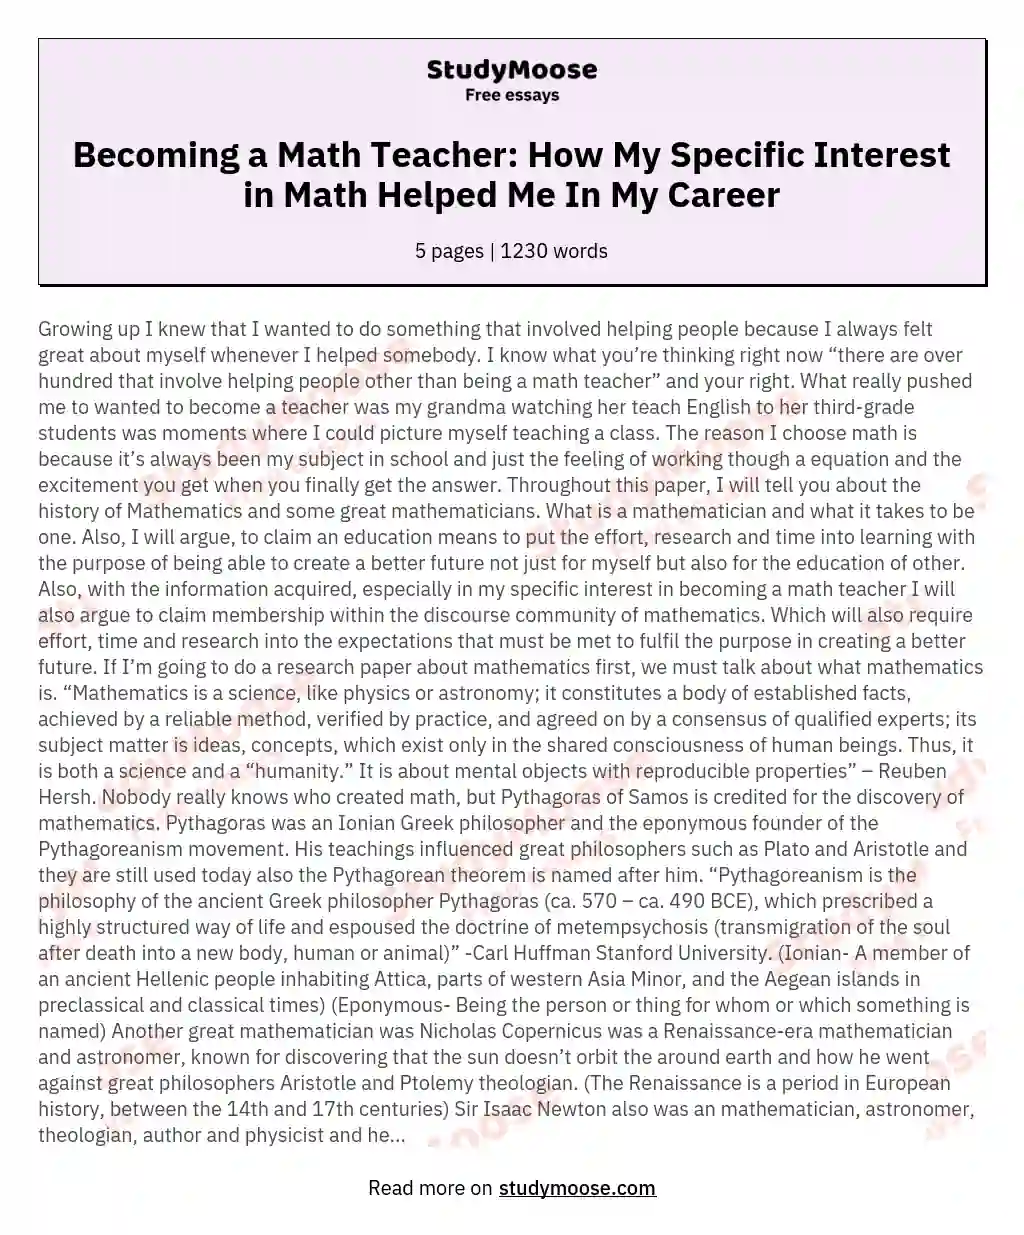 Becoming a Math Teacher: How My Specific Interest in Math Helped Me In My Career